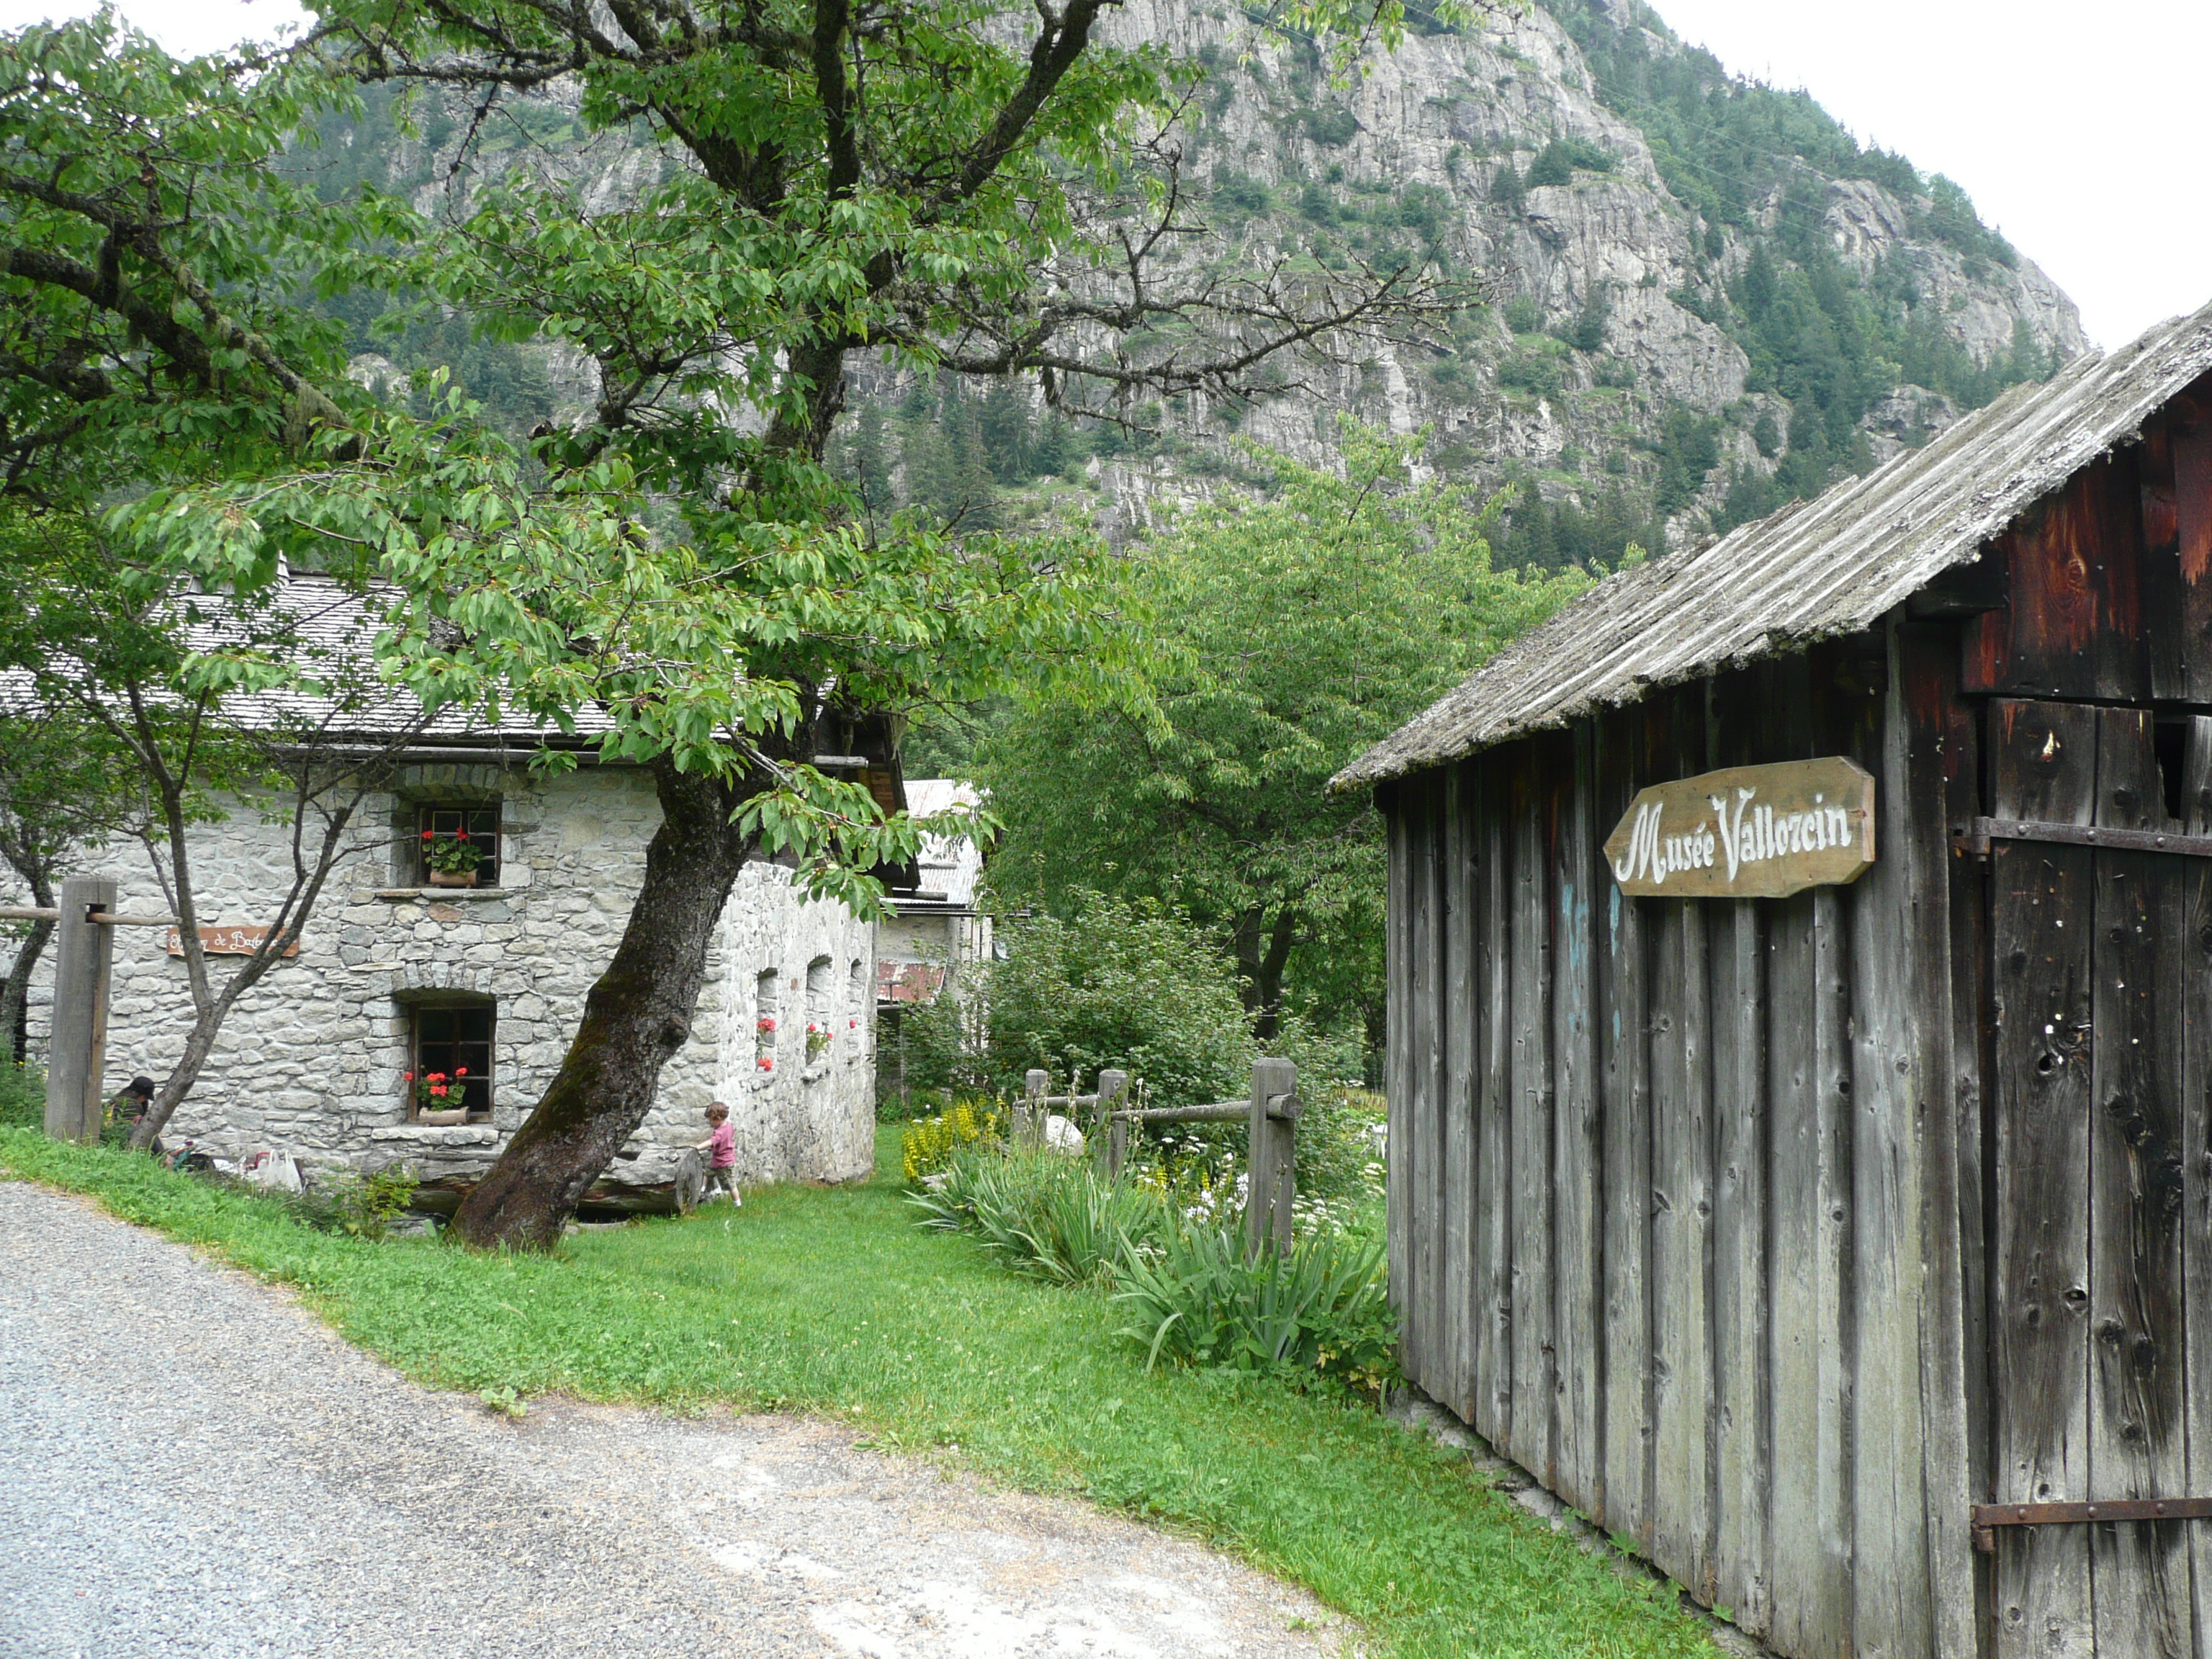 Frontage of the Maison de Barberine in Vallorcine